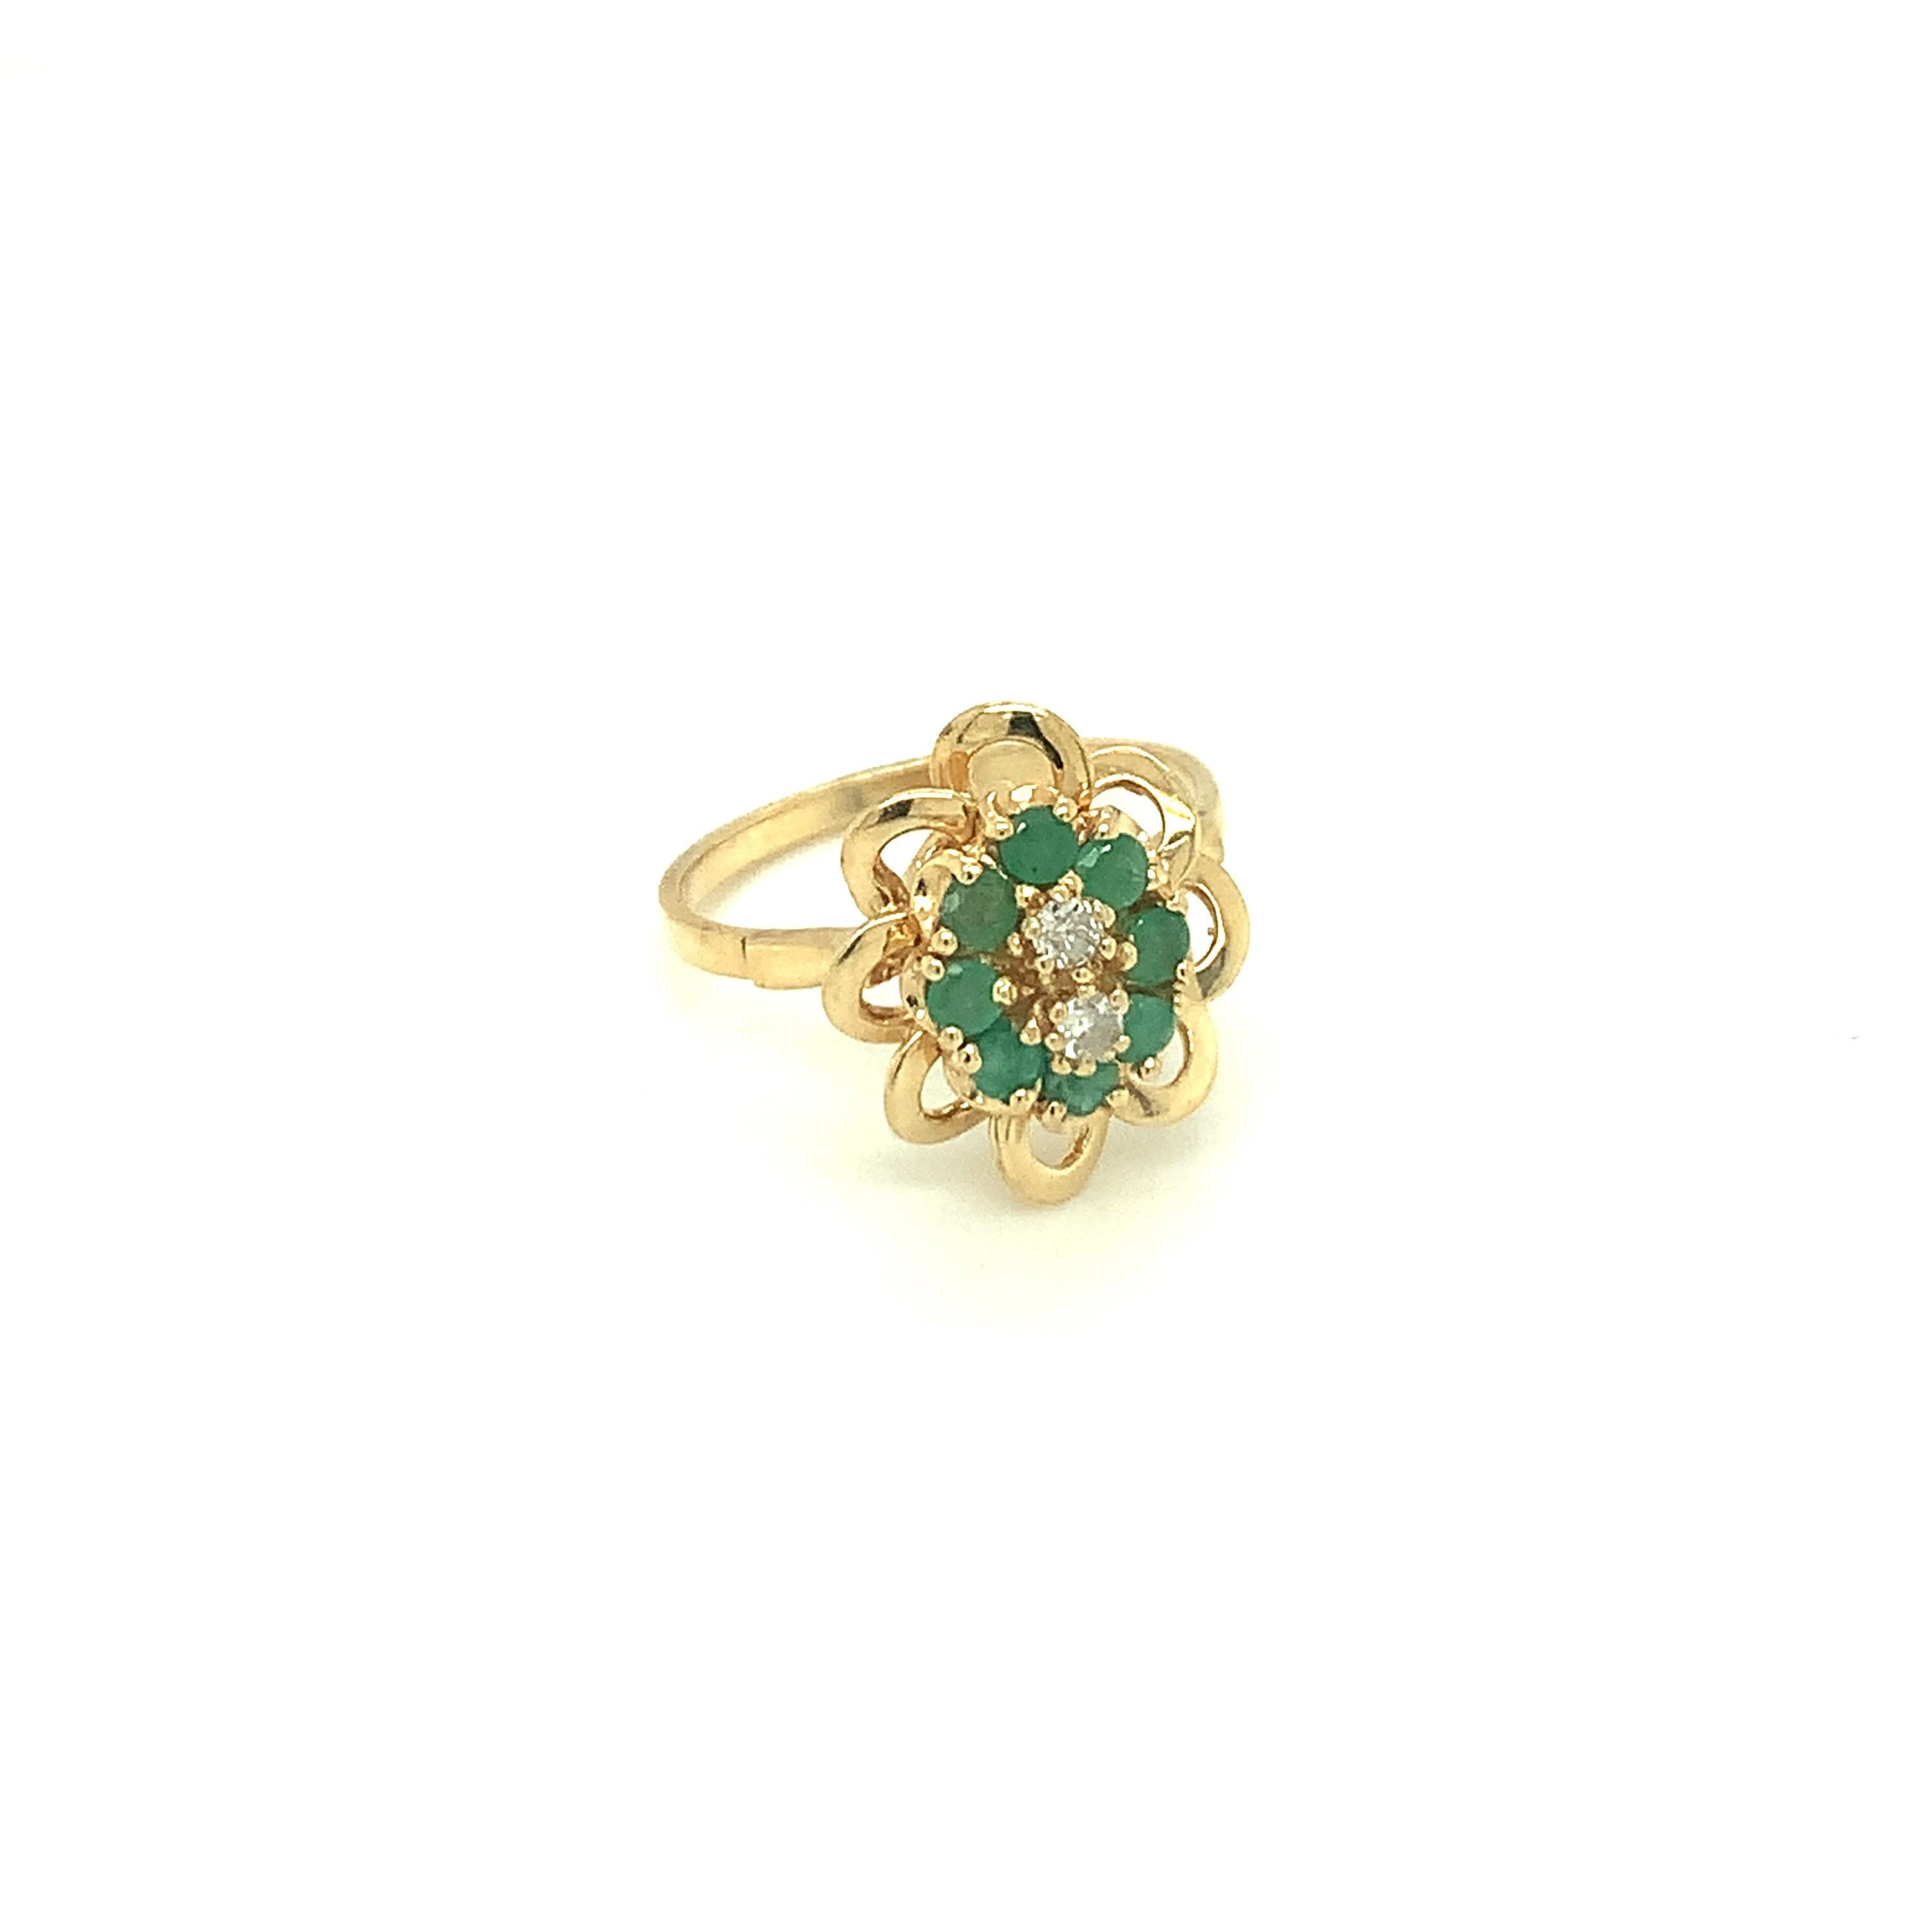 Emerald & Diamond Ring Set in 14K Yellow Gold In Good Condition For Sale In Trumbull, CT